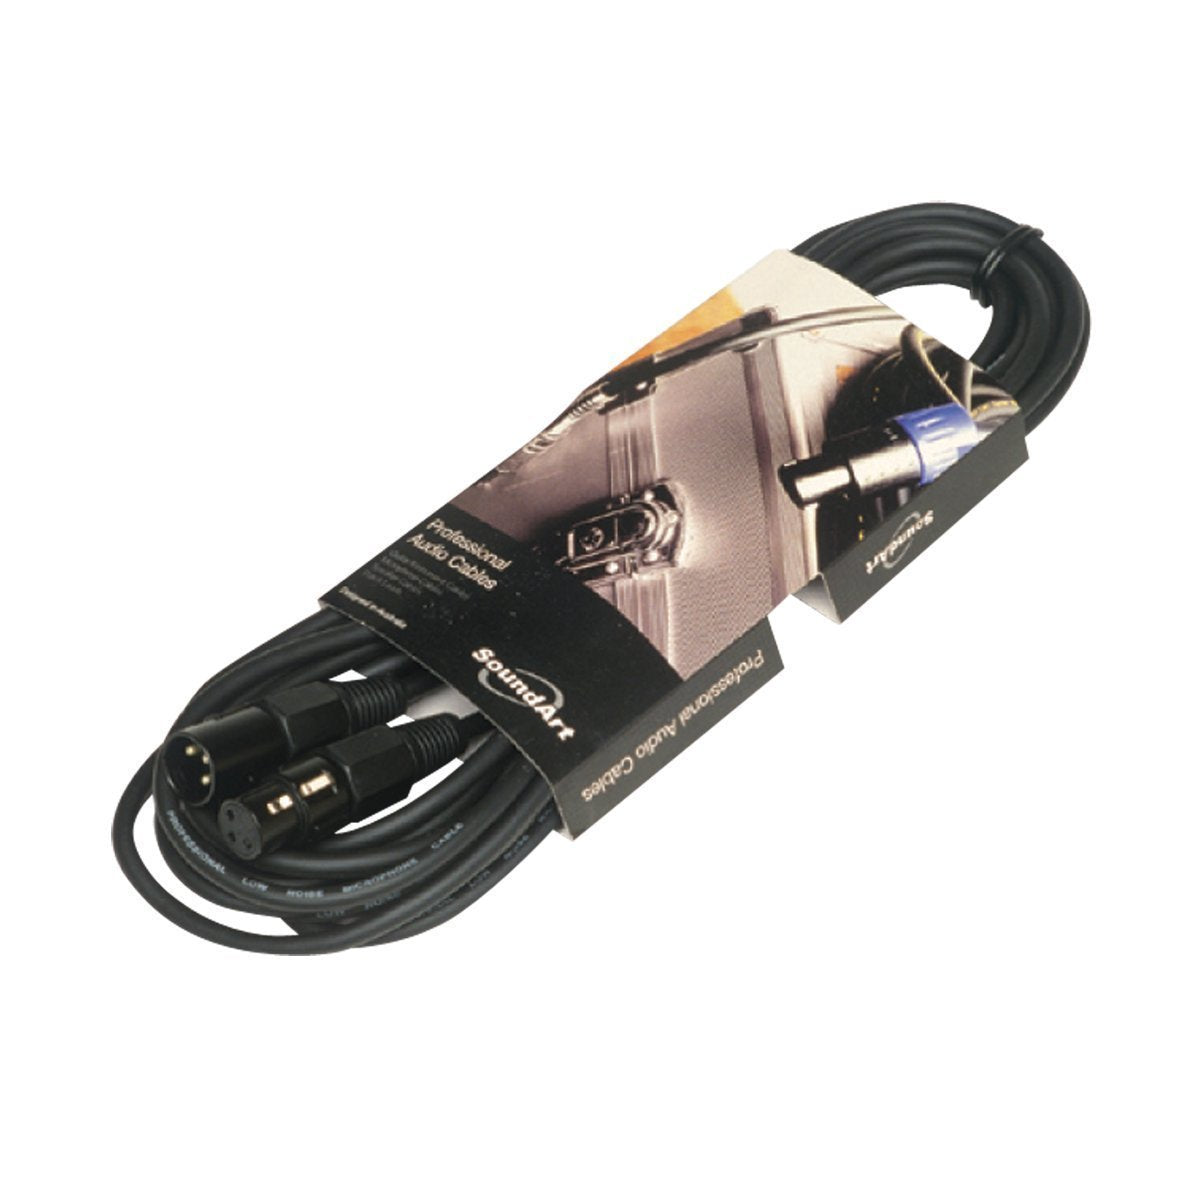 SoundArt SMC-14 Mic to Line Cable with XLR to XLR Plugs (8m)